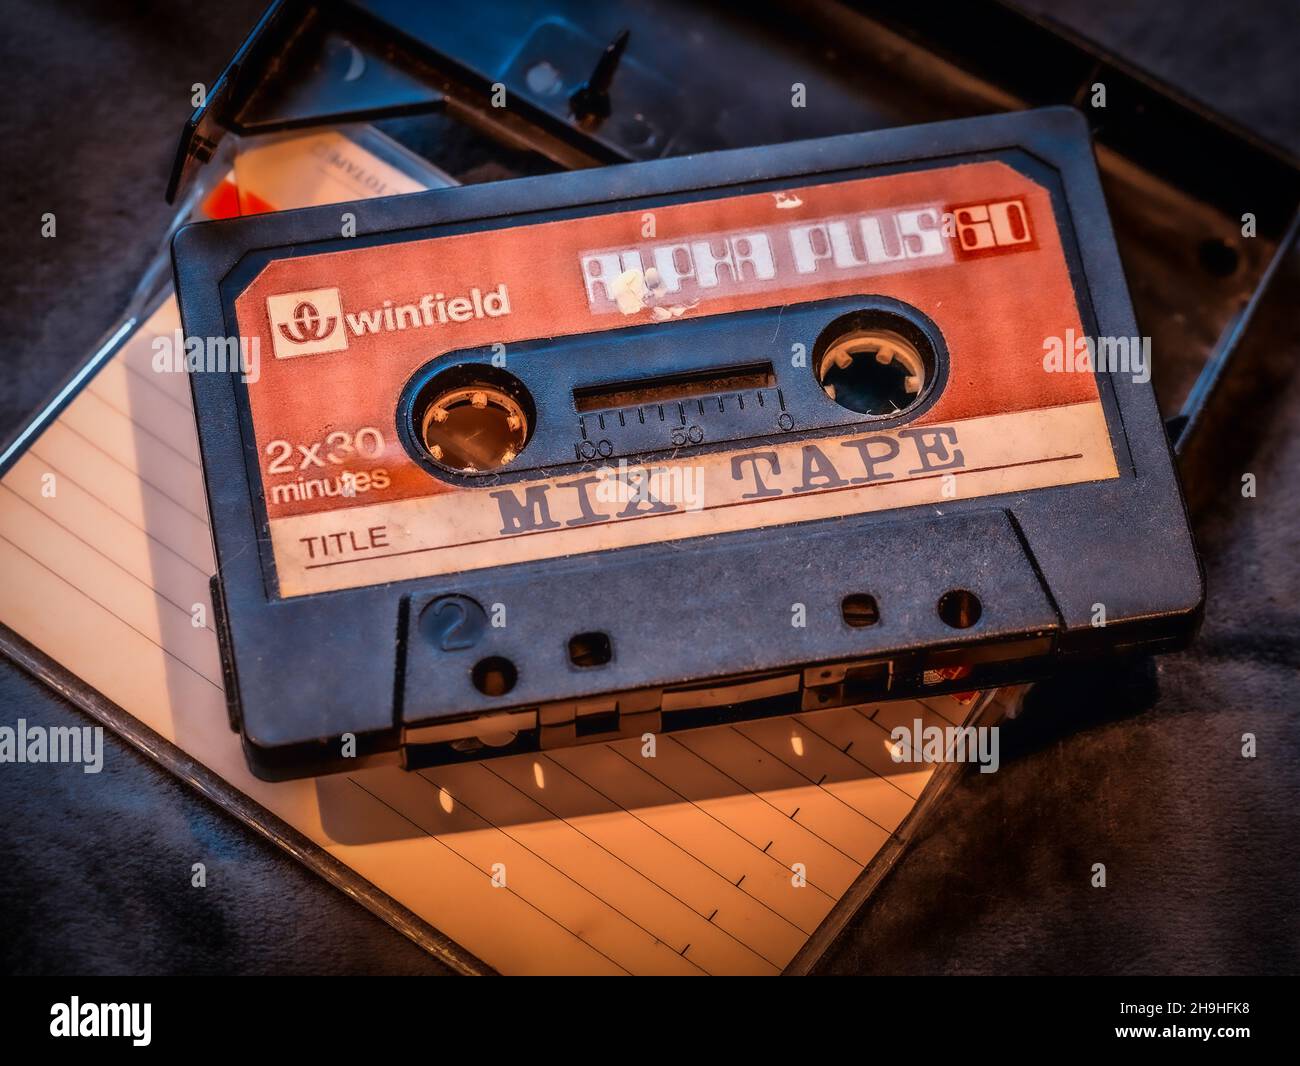 Retro Alpha plus 60 Winfield dogeared vintage cassette with Mix Tape written across the title area on a empty cassette case holder in the background Stock Photo